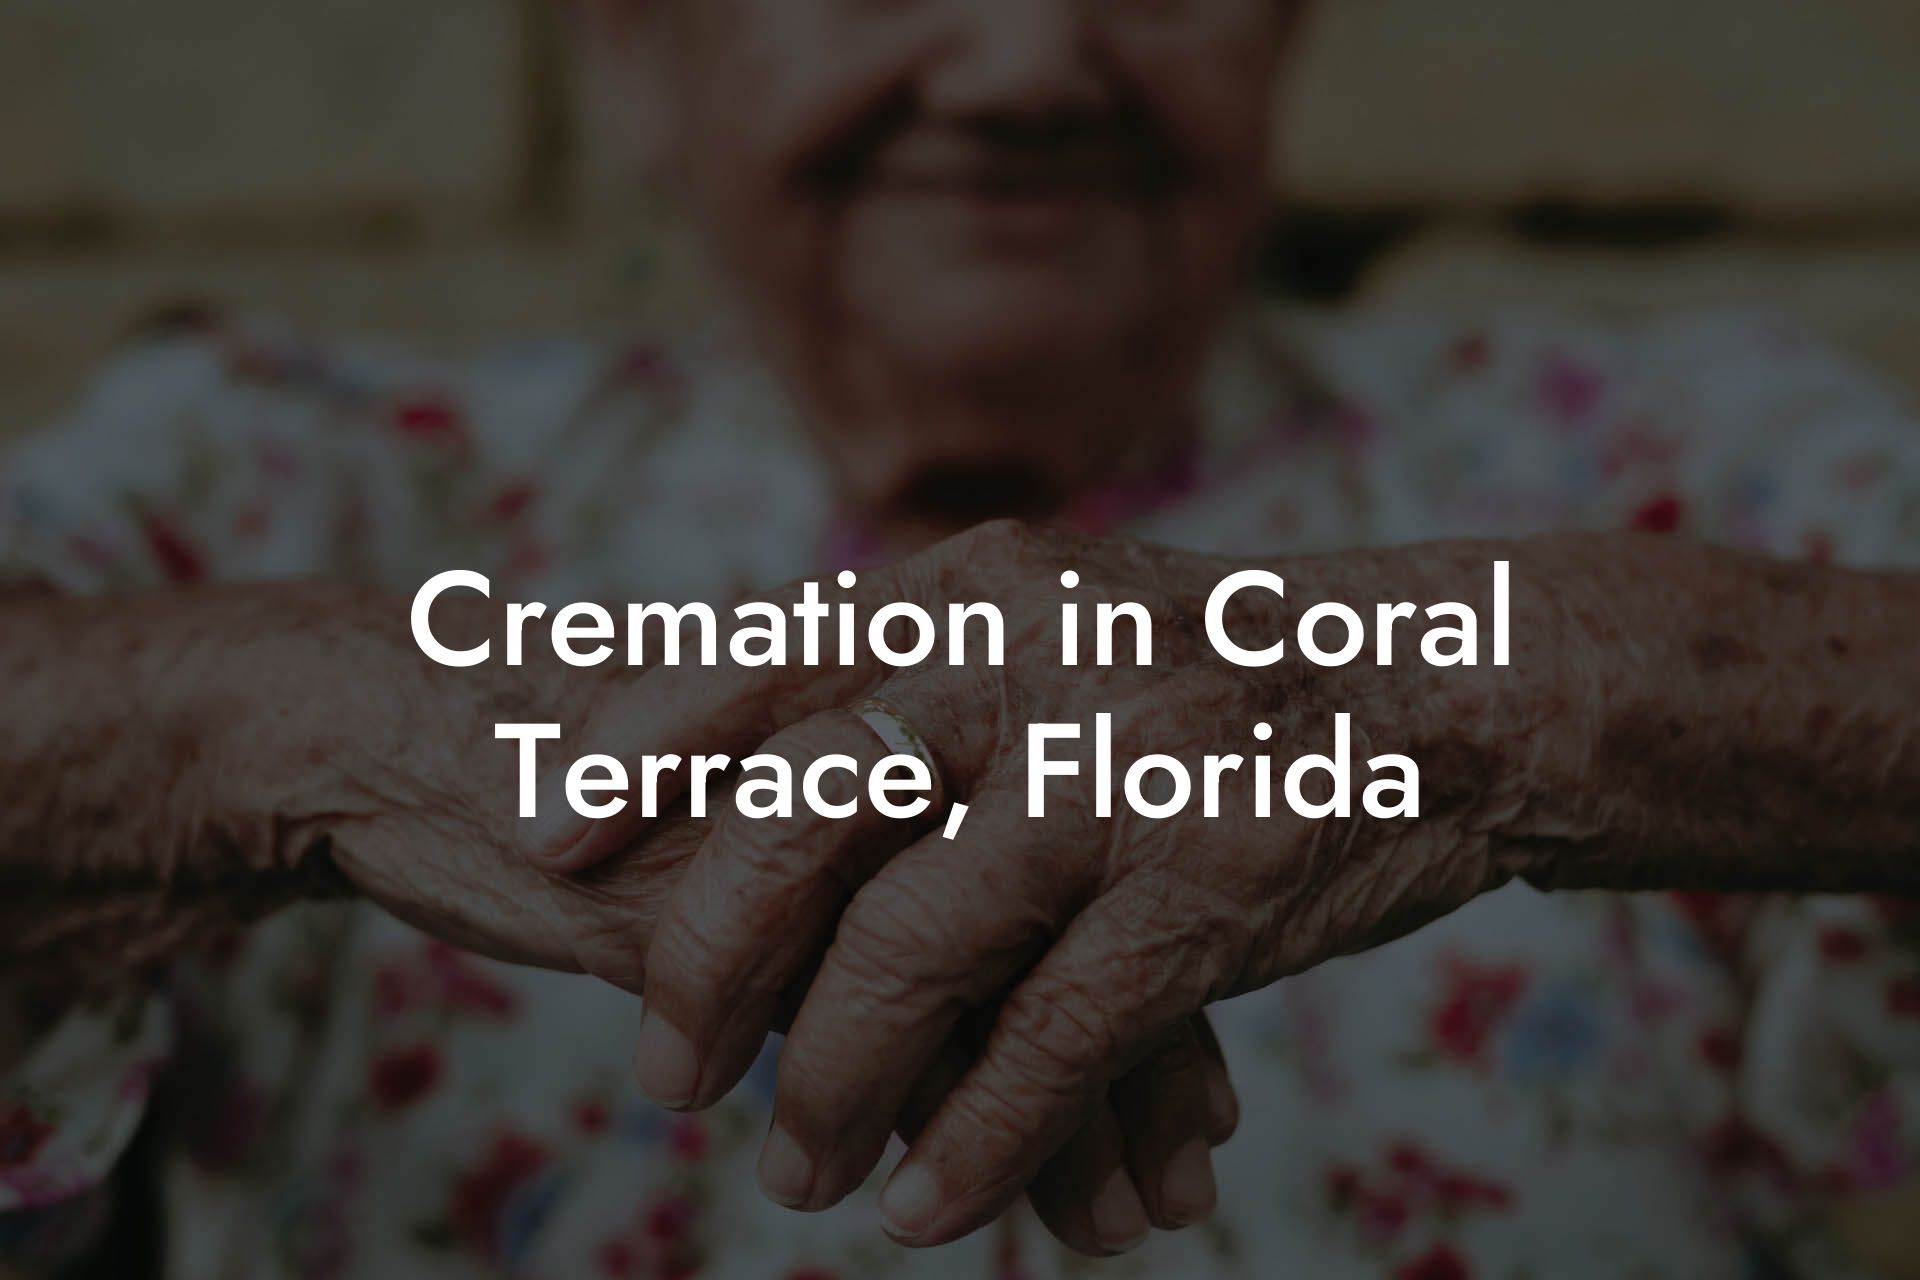 Cremation in Coral Terrace, Florida